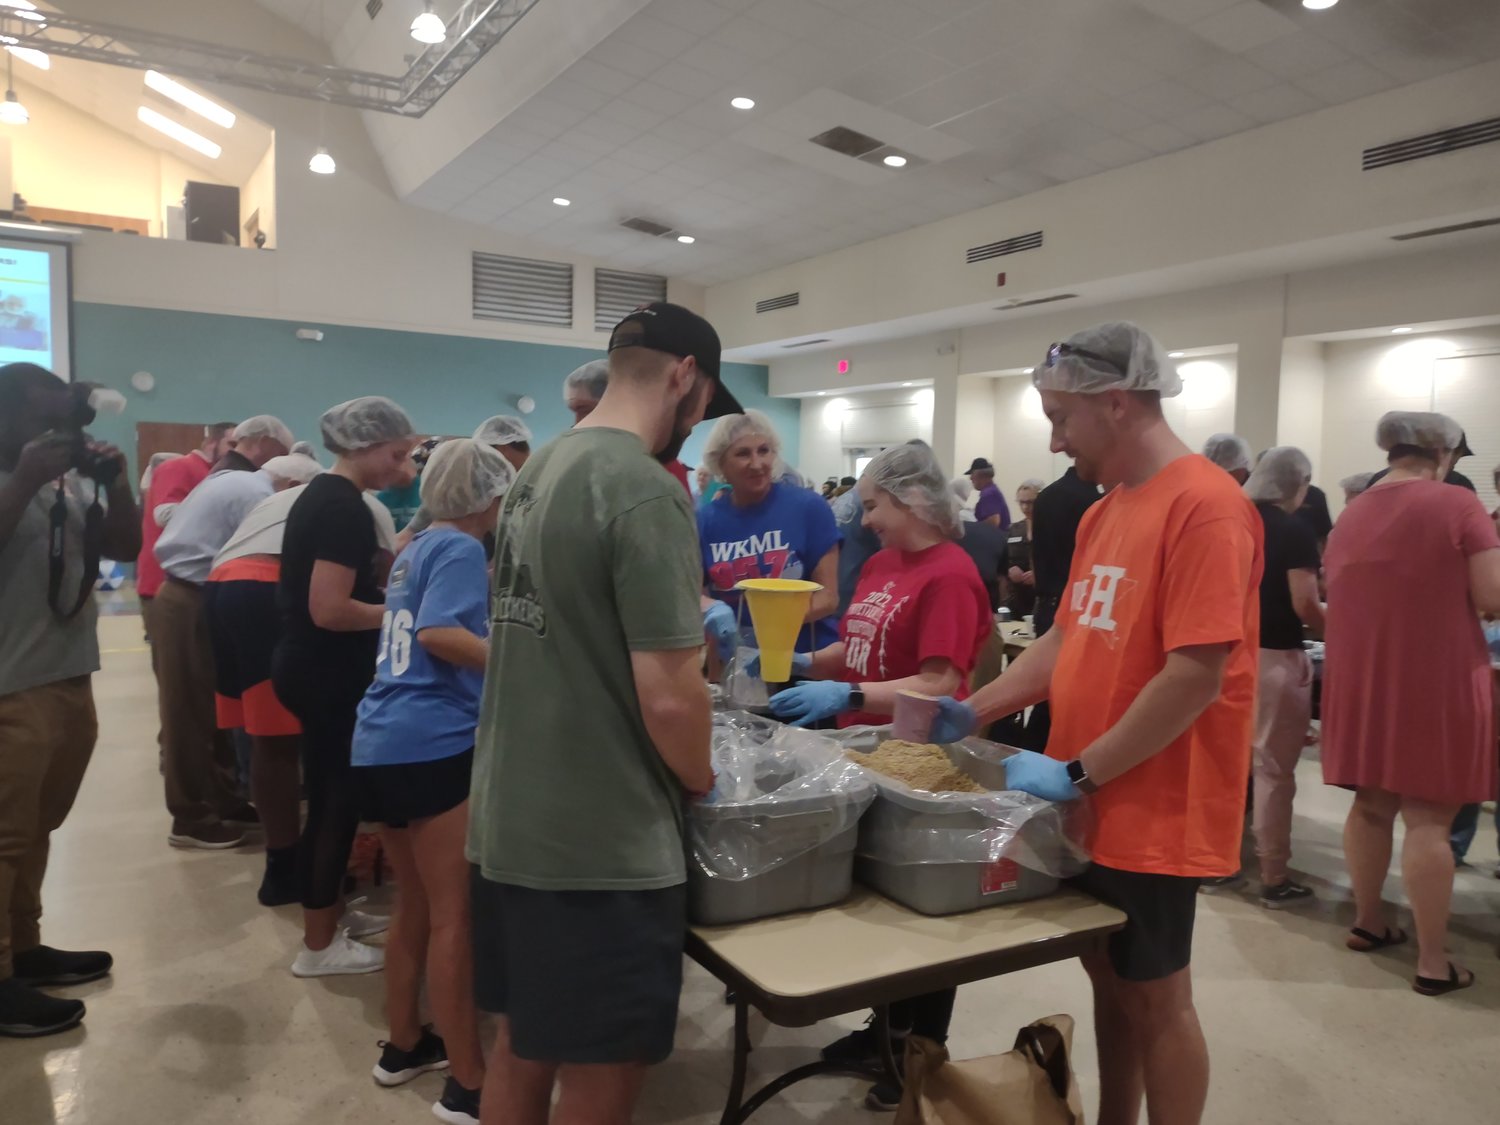 More than 35,000 meals were packaged Thursday as part of United Way of Cumberland County’s second annual meal packing campaign. The meals will go to food pantry programs at Fayetteville Urban Ministry and Catholic Charities.